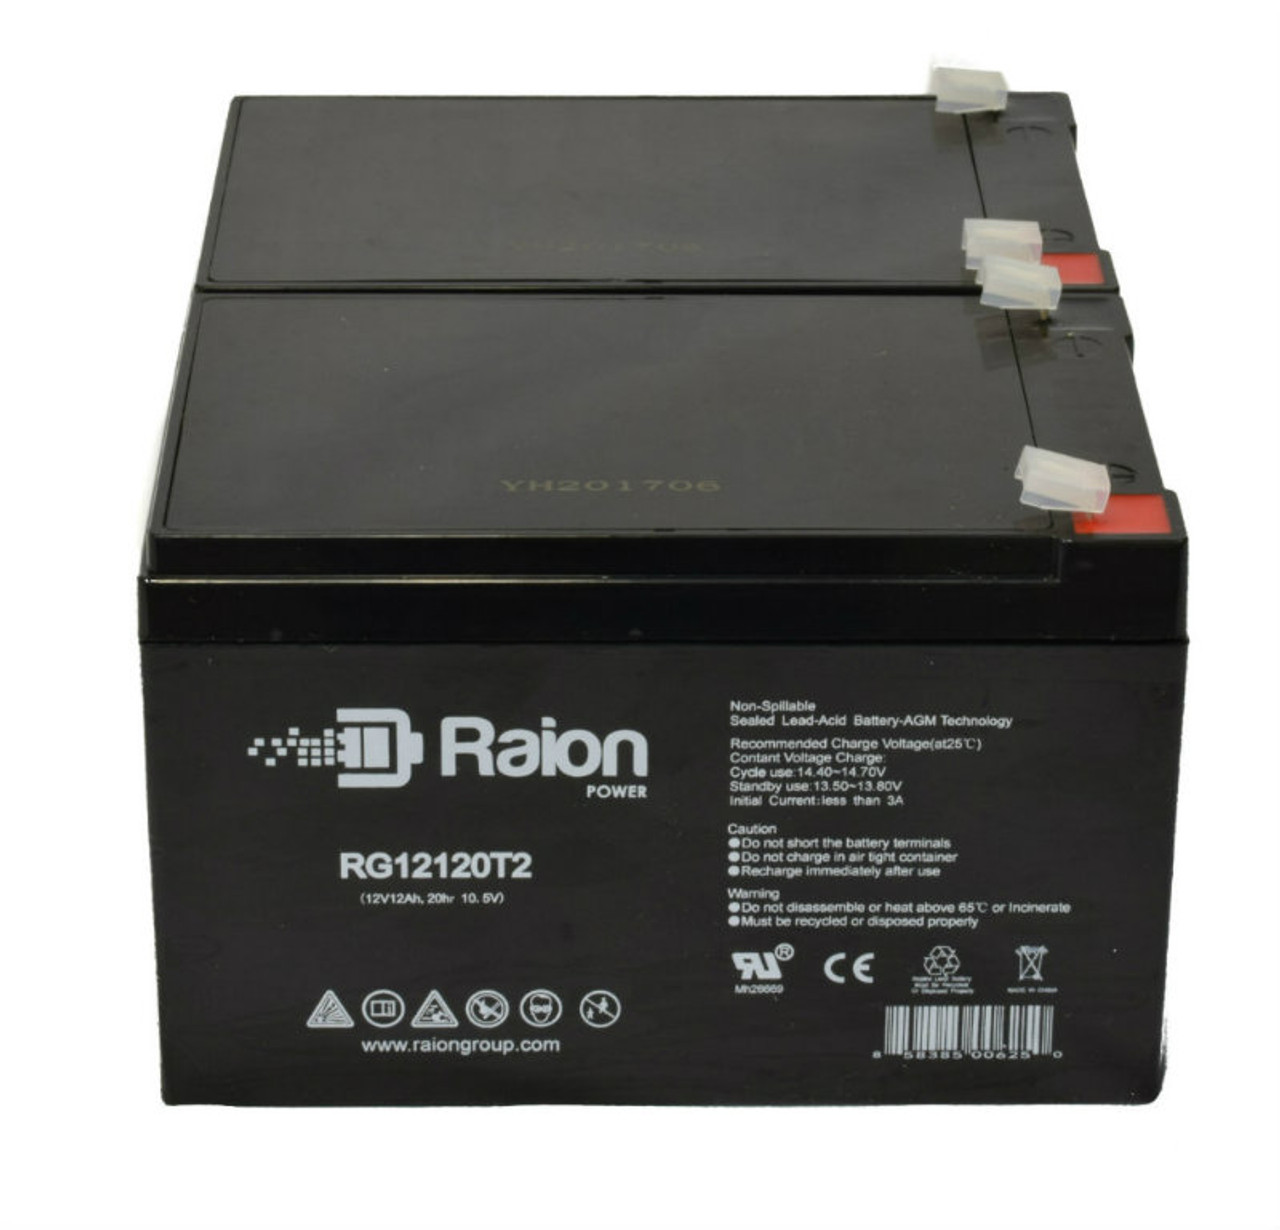 Raion Power 12V 12Ah Non-Spillable Compatible Replacement Battery for Mongoose Fusion Scooter MTN24V450 - (2 Pack)